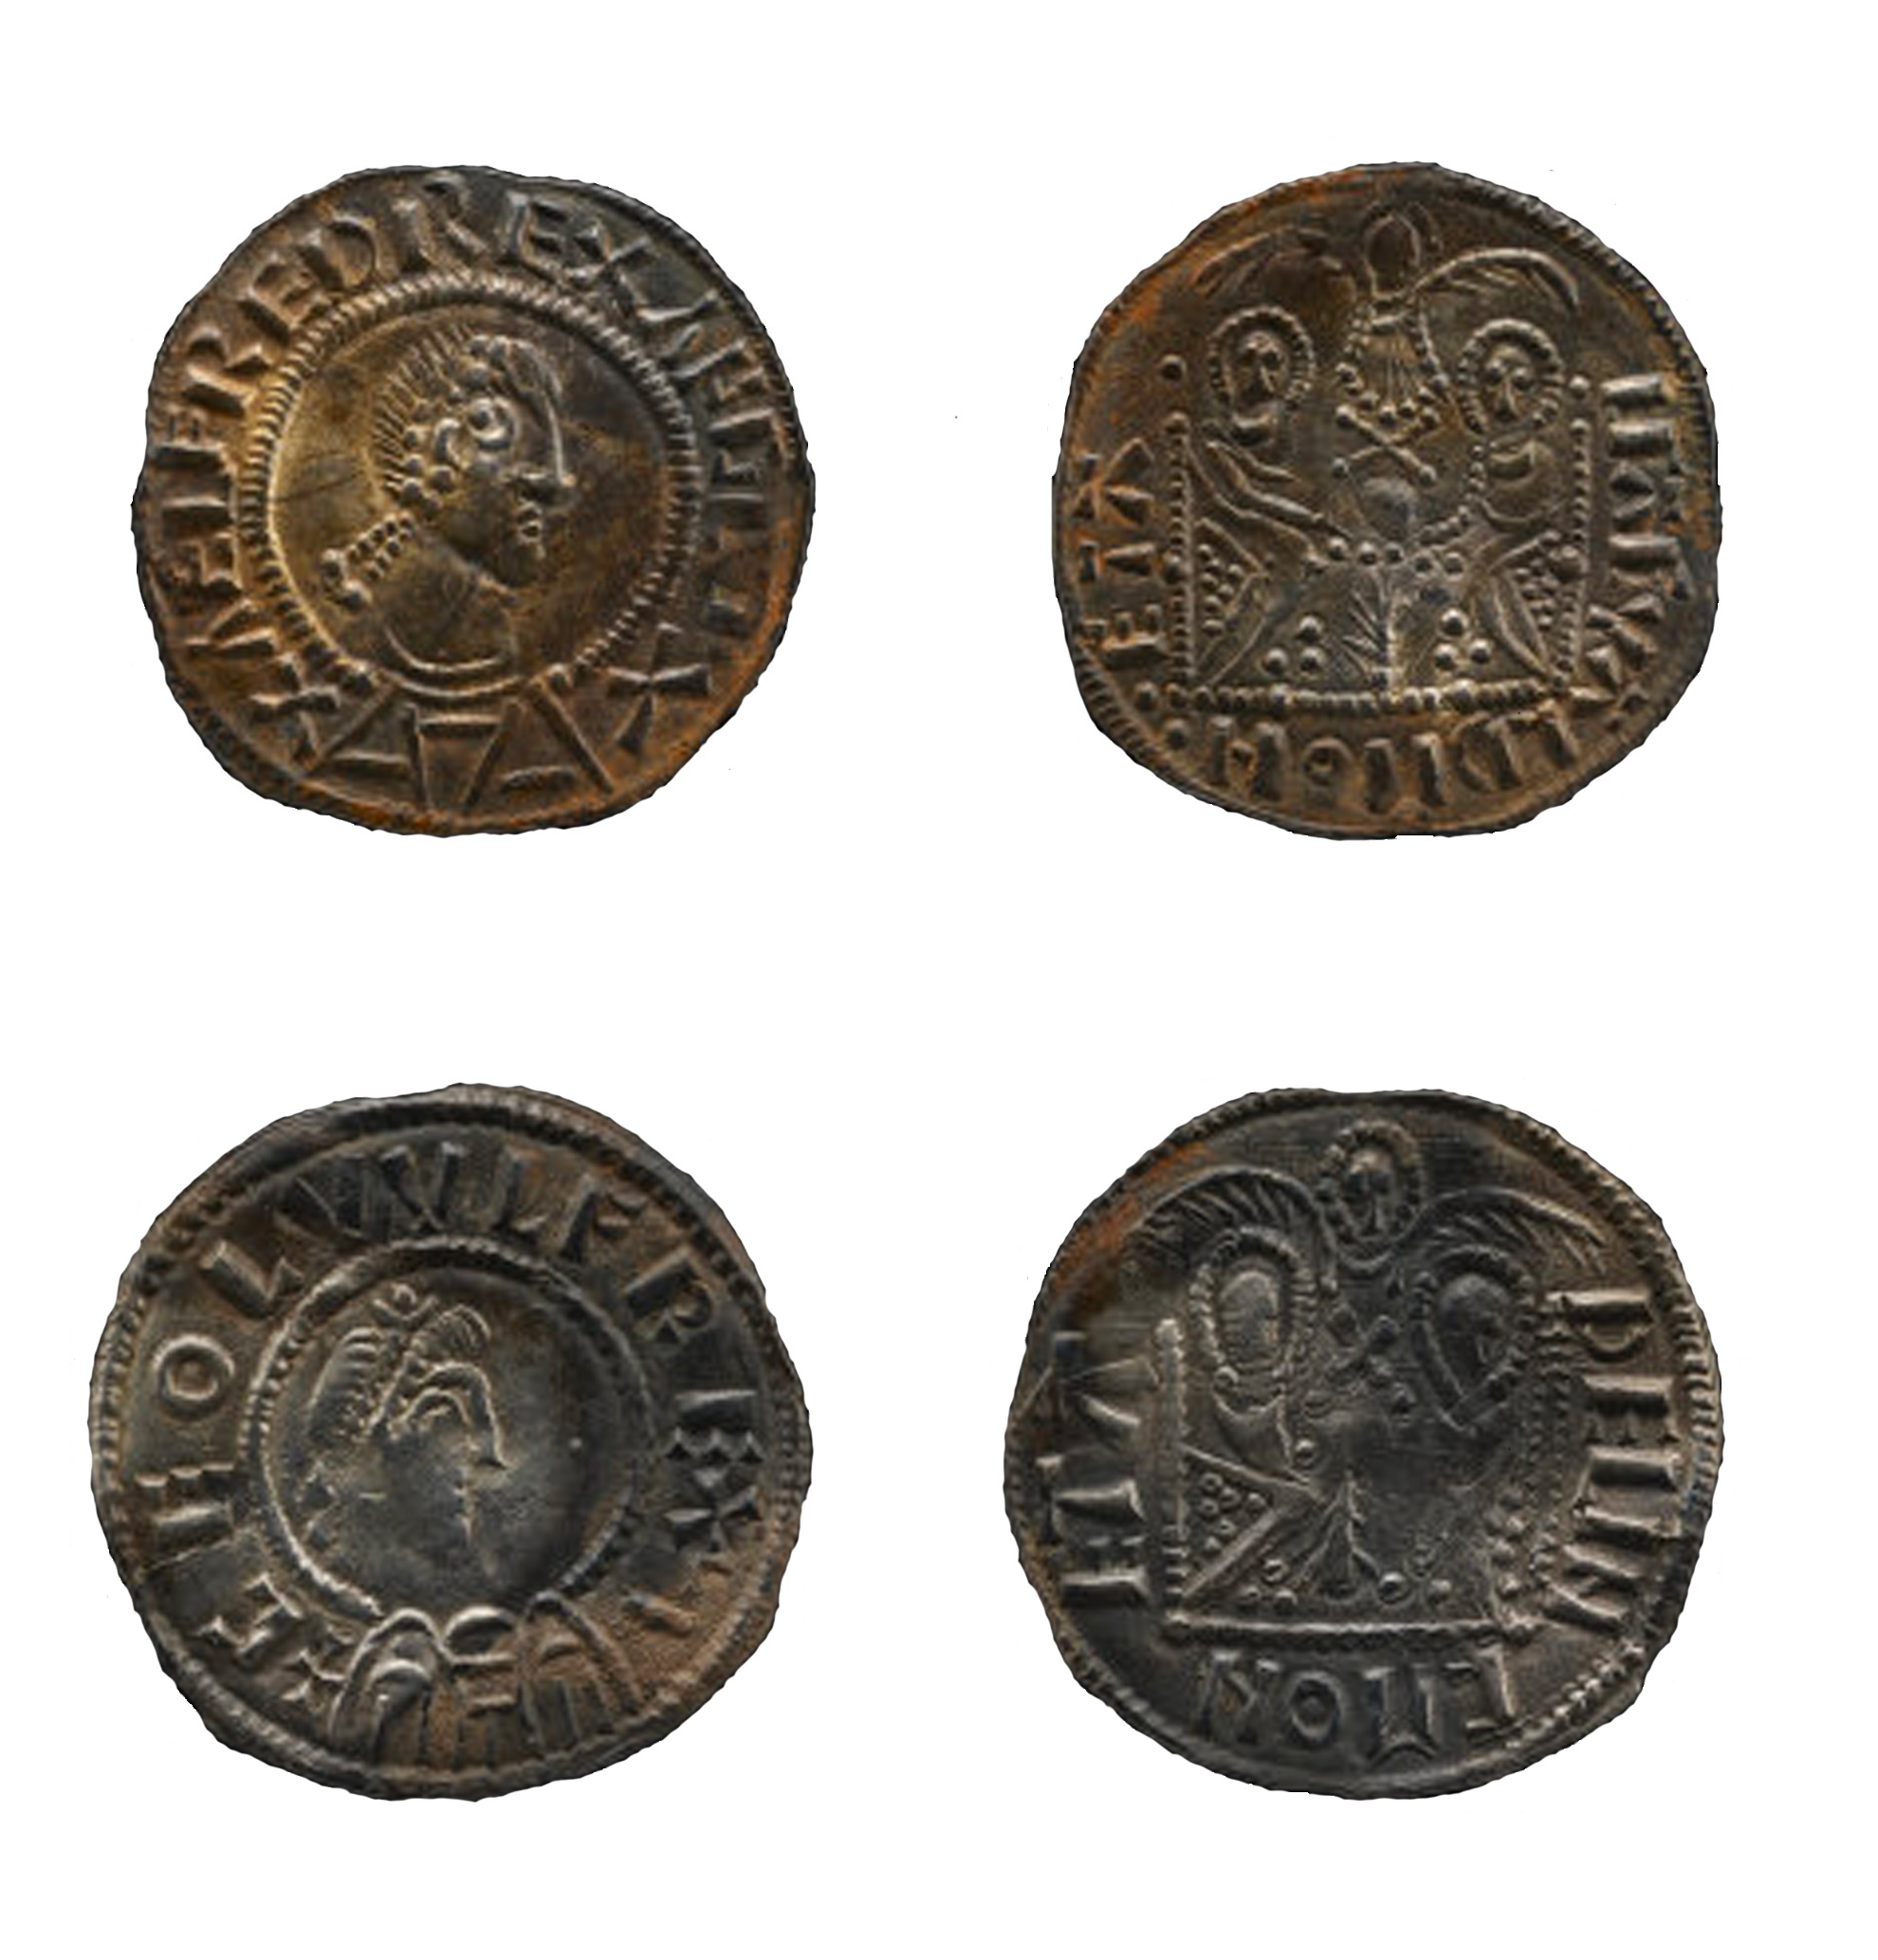 Rare and highly significant silver coins of Alfred of Wessex and of Ceolwulf II of Mercia dated 875-878/9. Including examples of the ‘two emperor’ type, which show a political alliance between the Kingdoms of Wessex and Mercia in the late 9th century